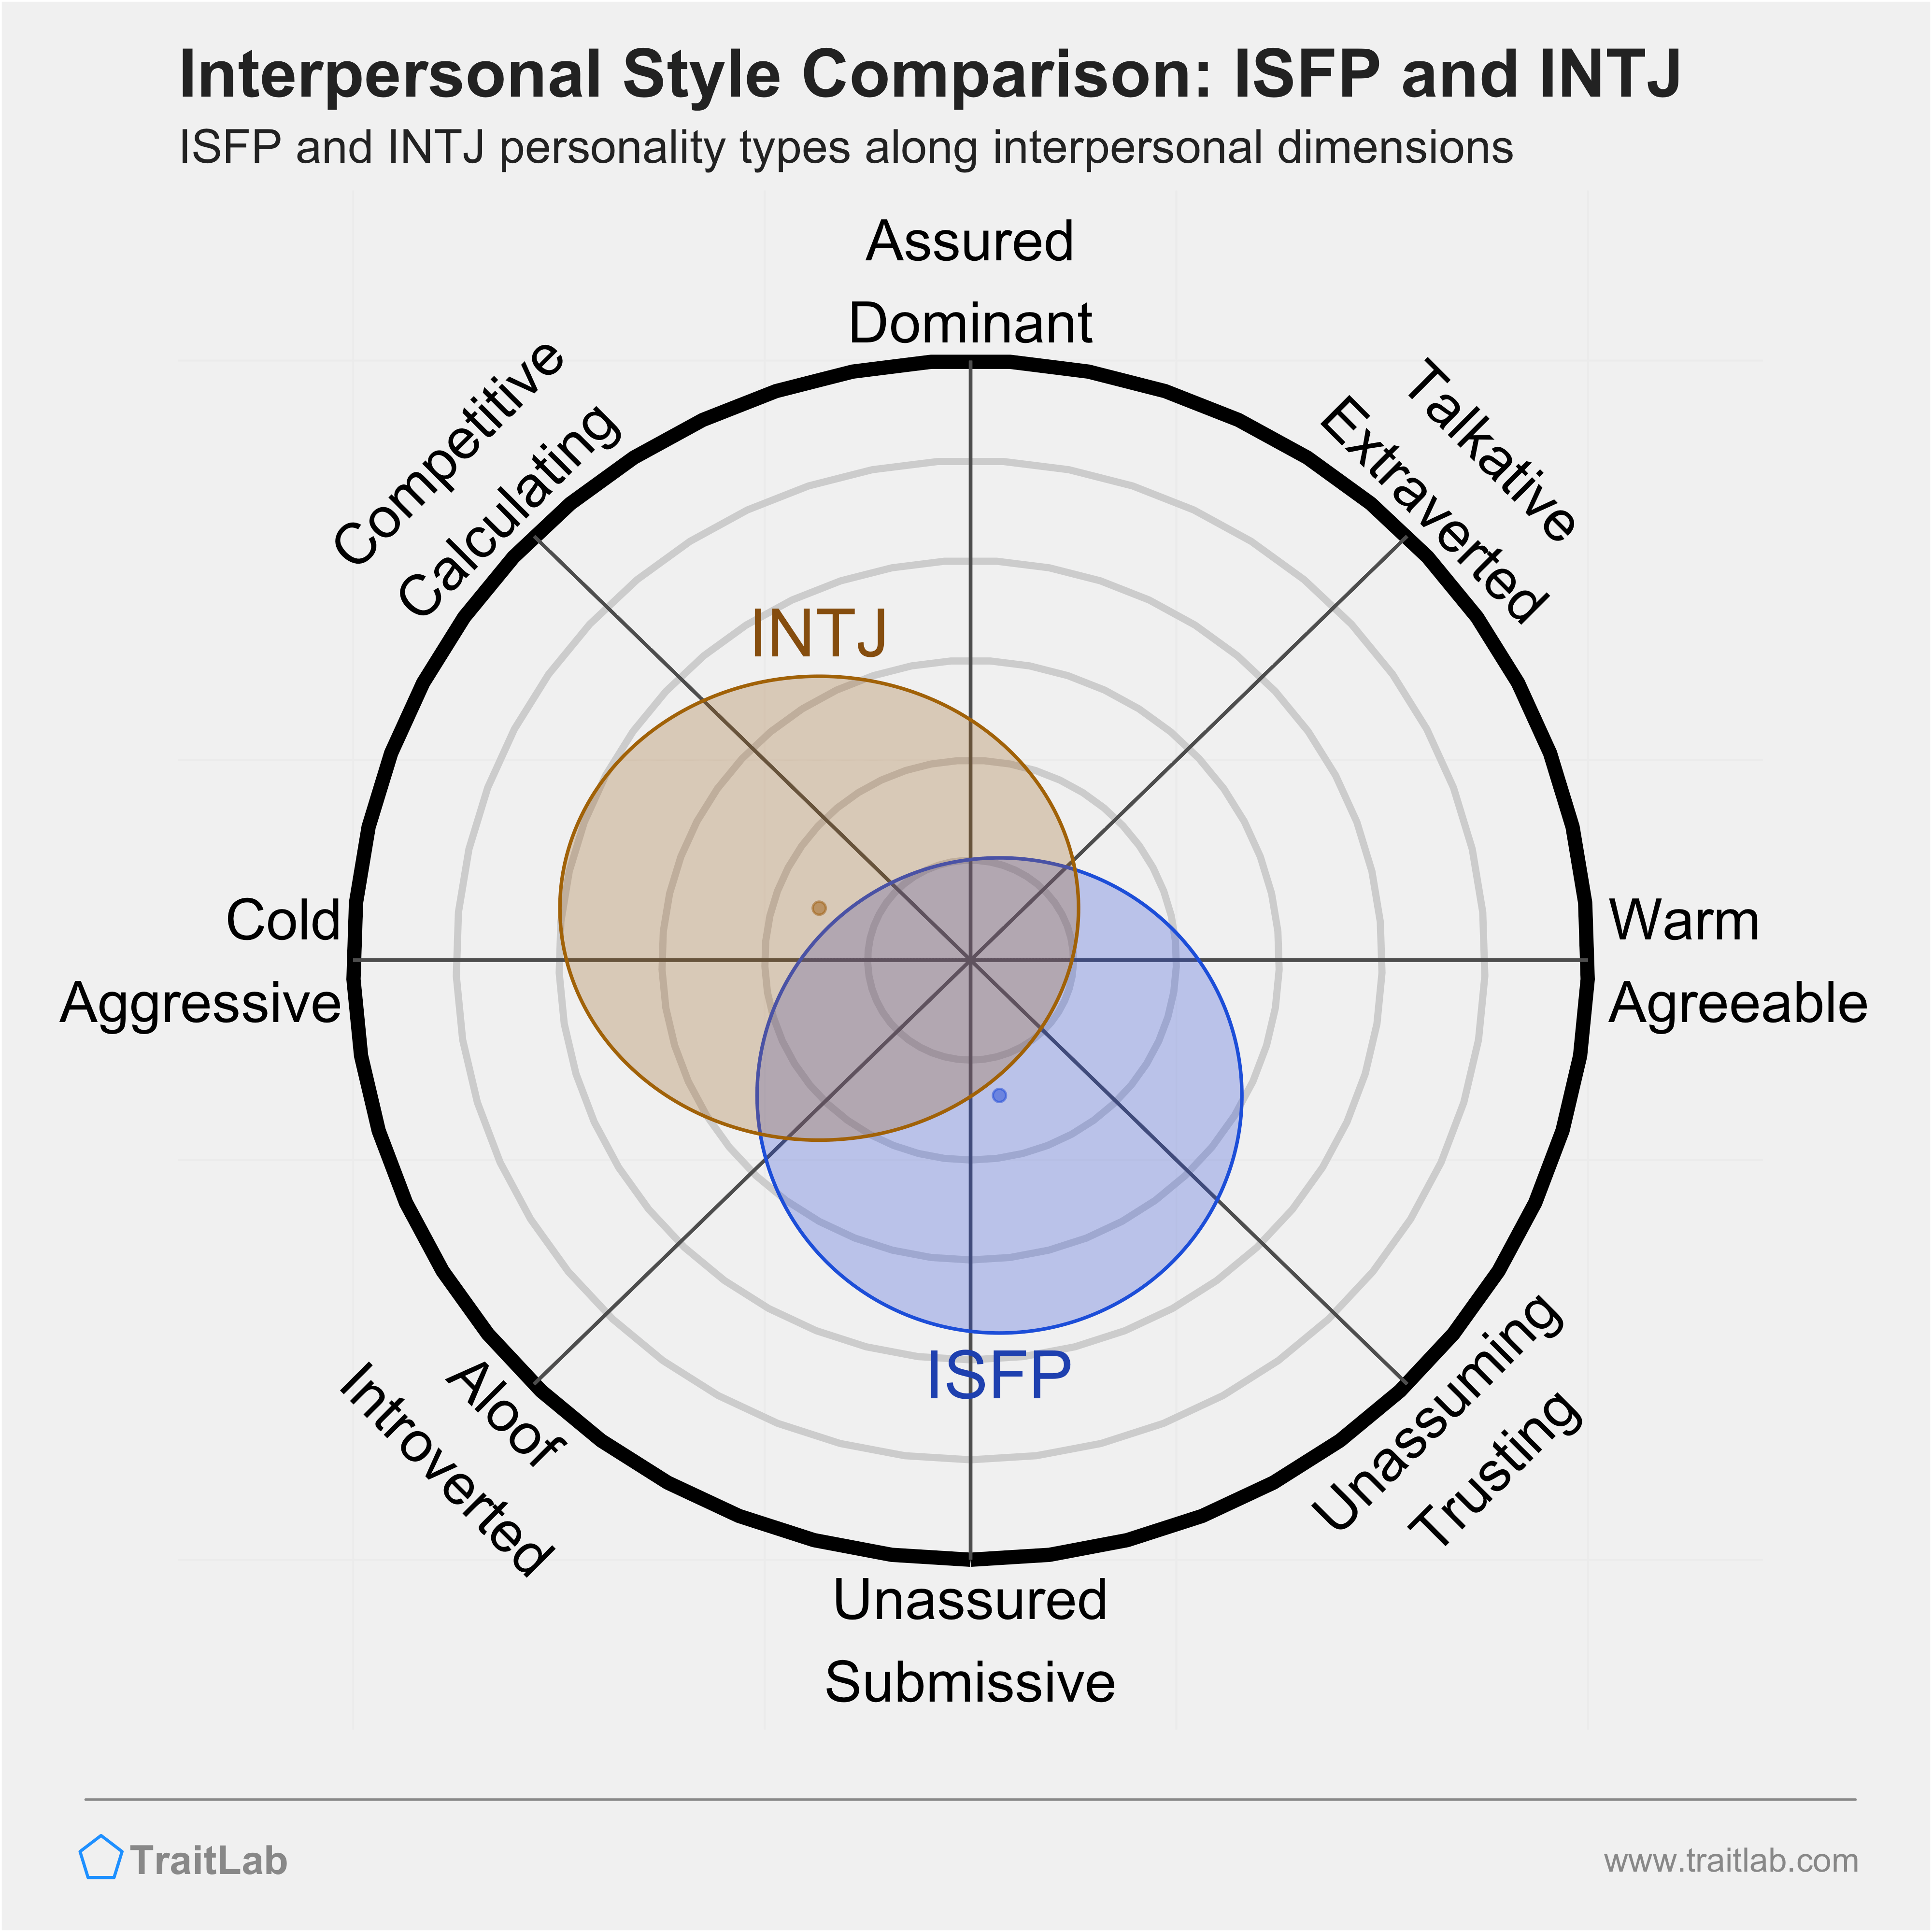 ISFP and INTJ comparison across interpersonal dimensions